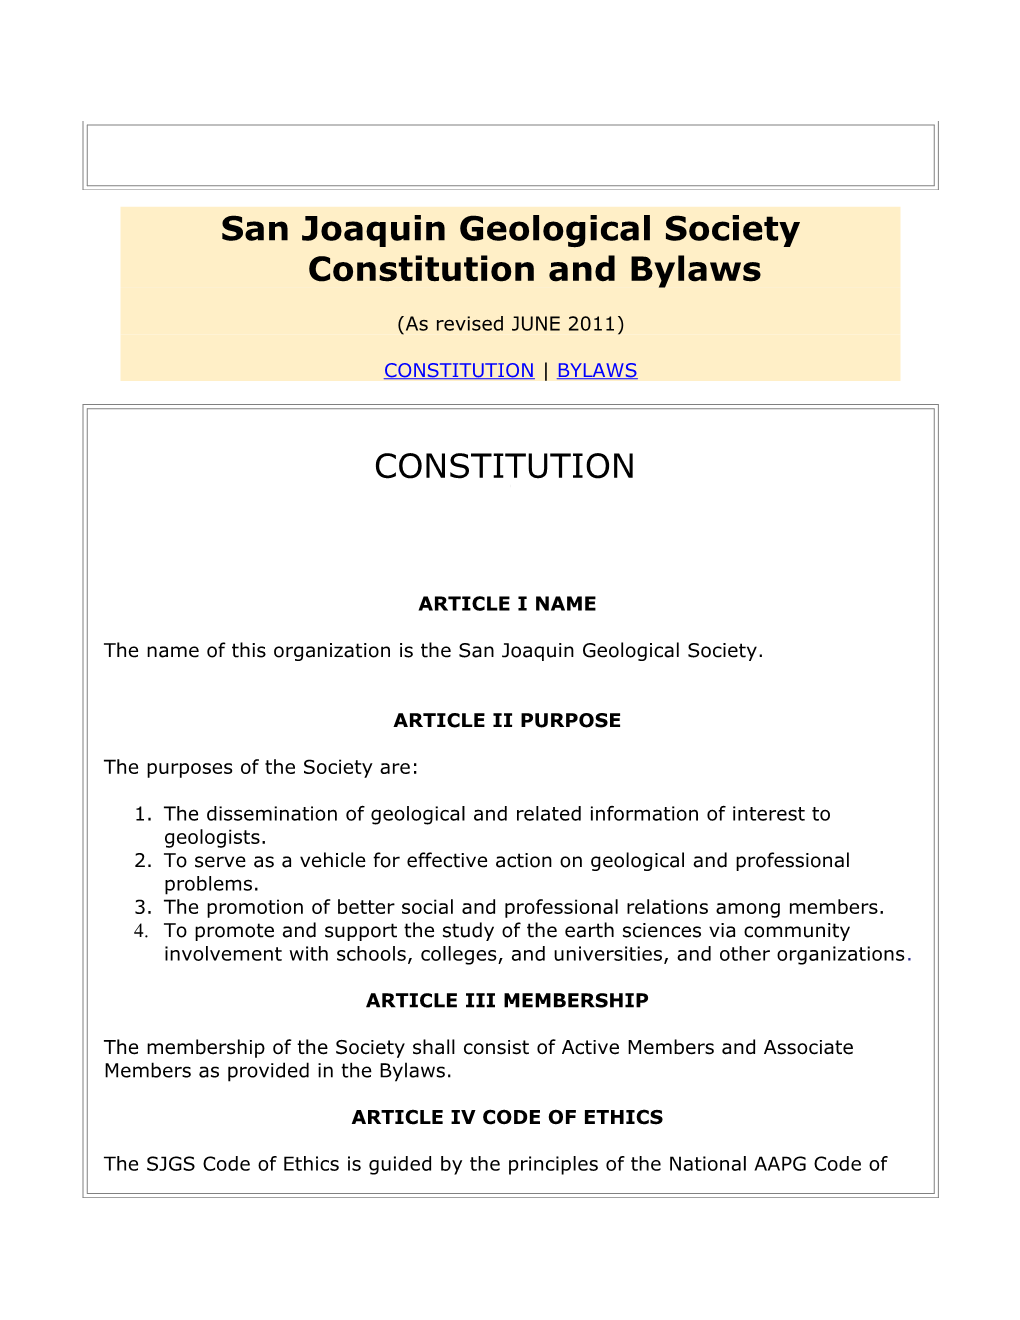 San Joaquin Geological Society Constitution and Bylaws